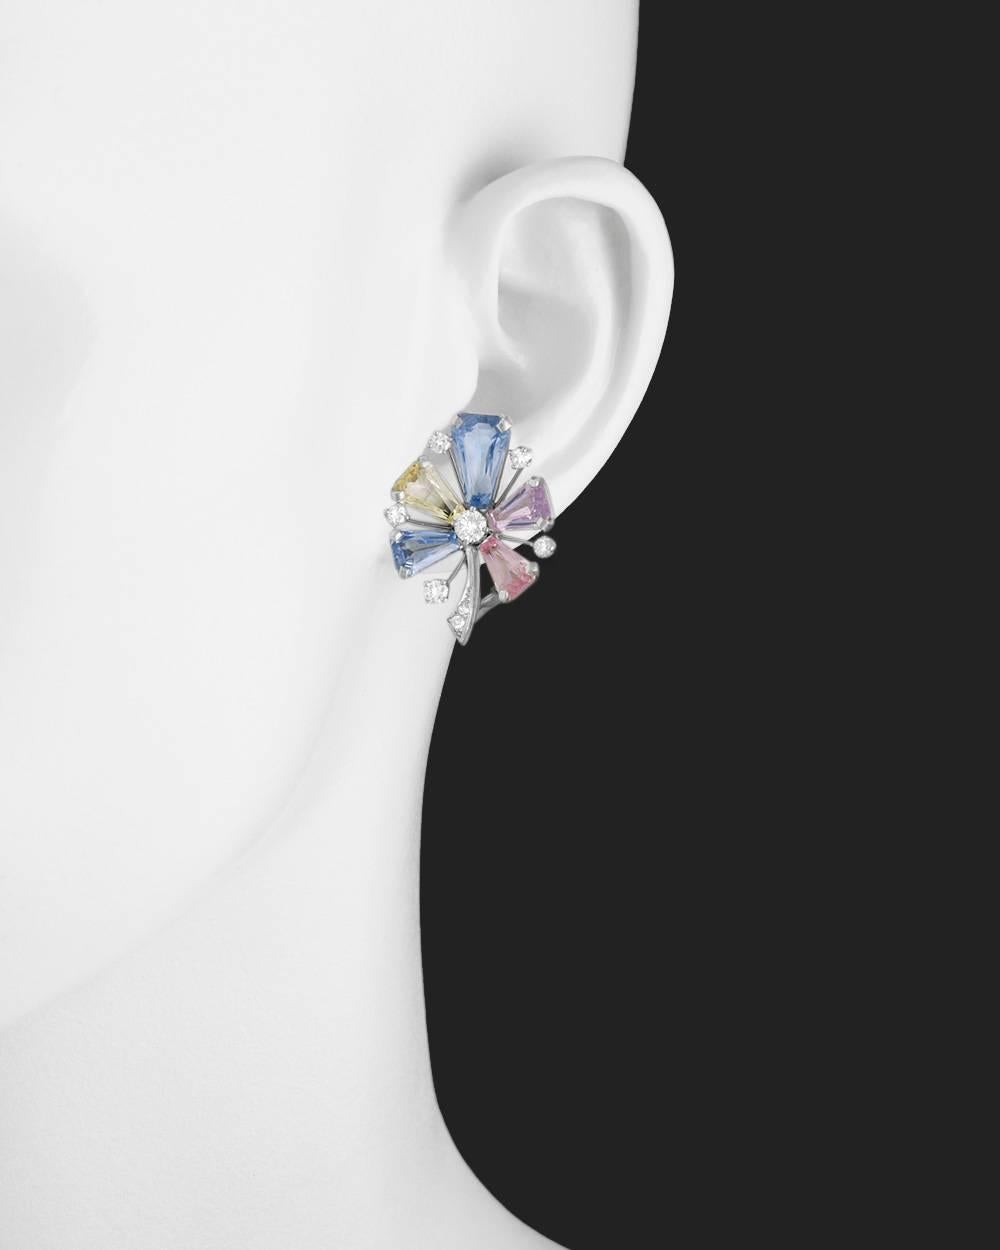 Stylized flower earclips, designed with five multicolored pastel-toned sapphire petals accented by circular-cut diamonds, mounted in platinum, with clip backs, signed 'JEC & Co' for J.E. Caldwell. Ten sapphires weighing approximately 20 total